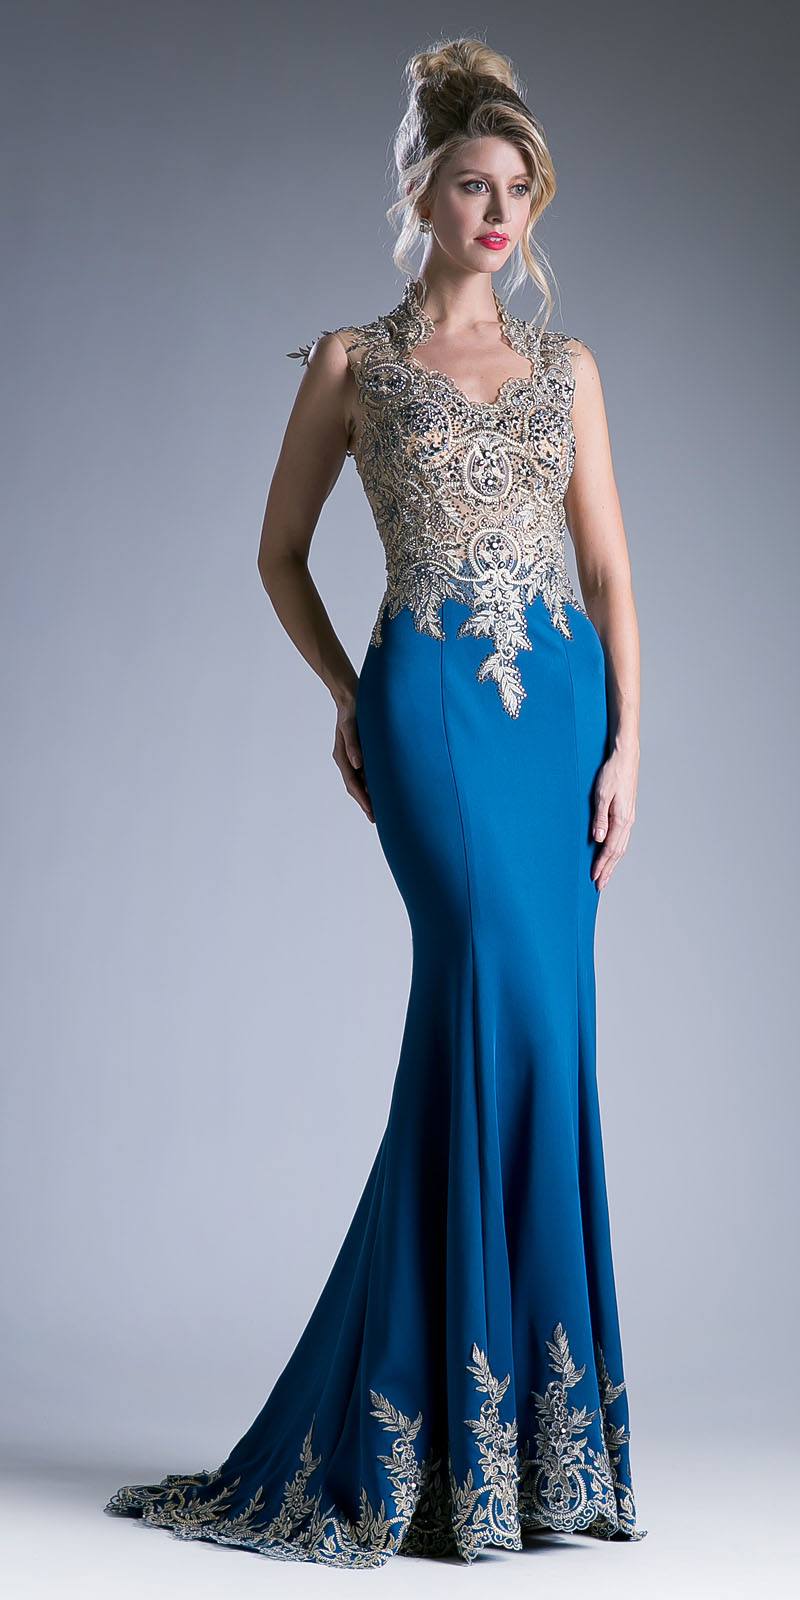 Teal Embroidered Mermaid Long Prom Dress Queen Anne Neckline ...